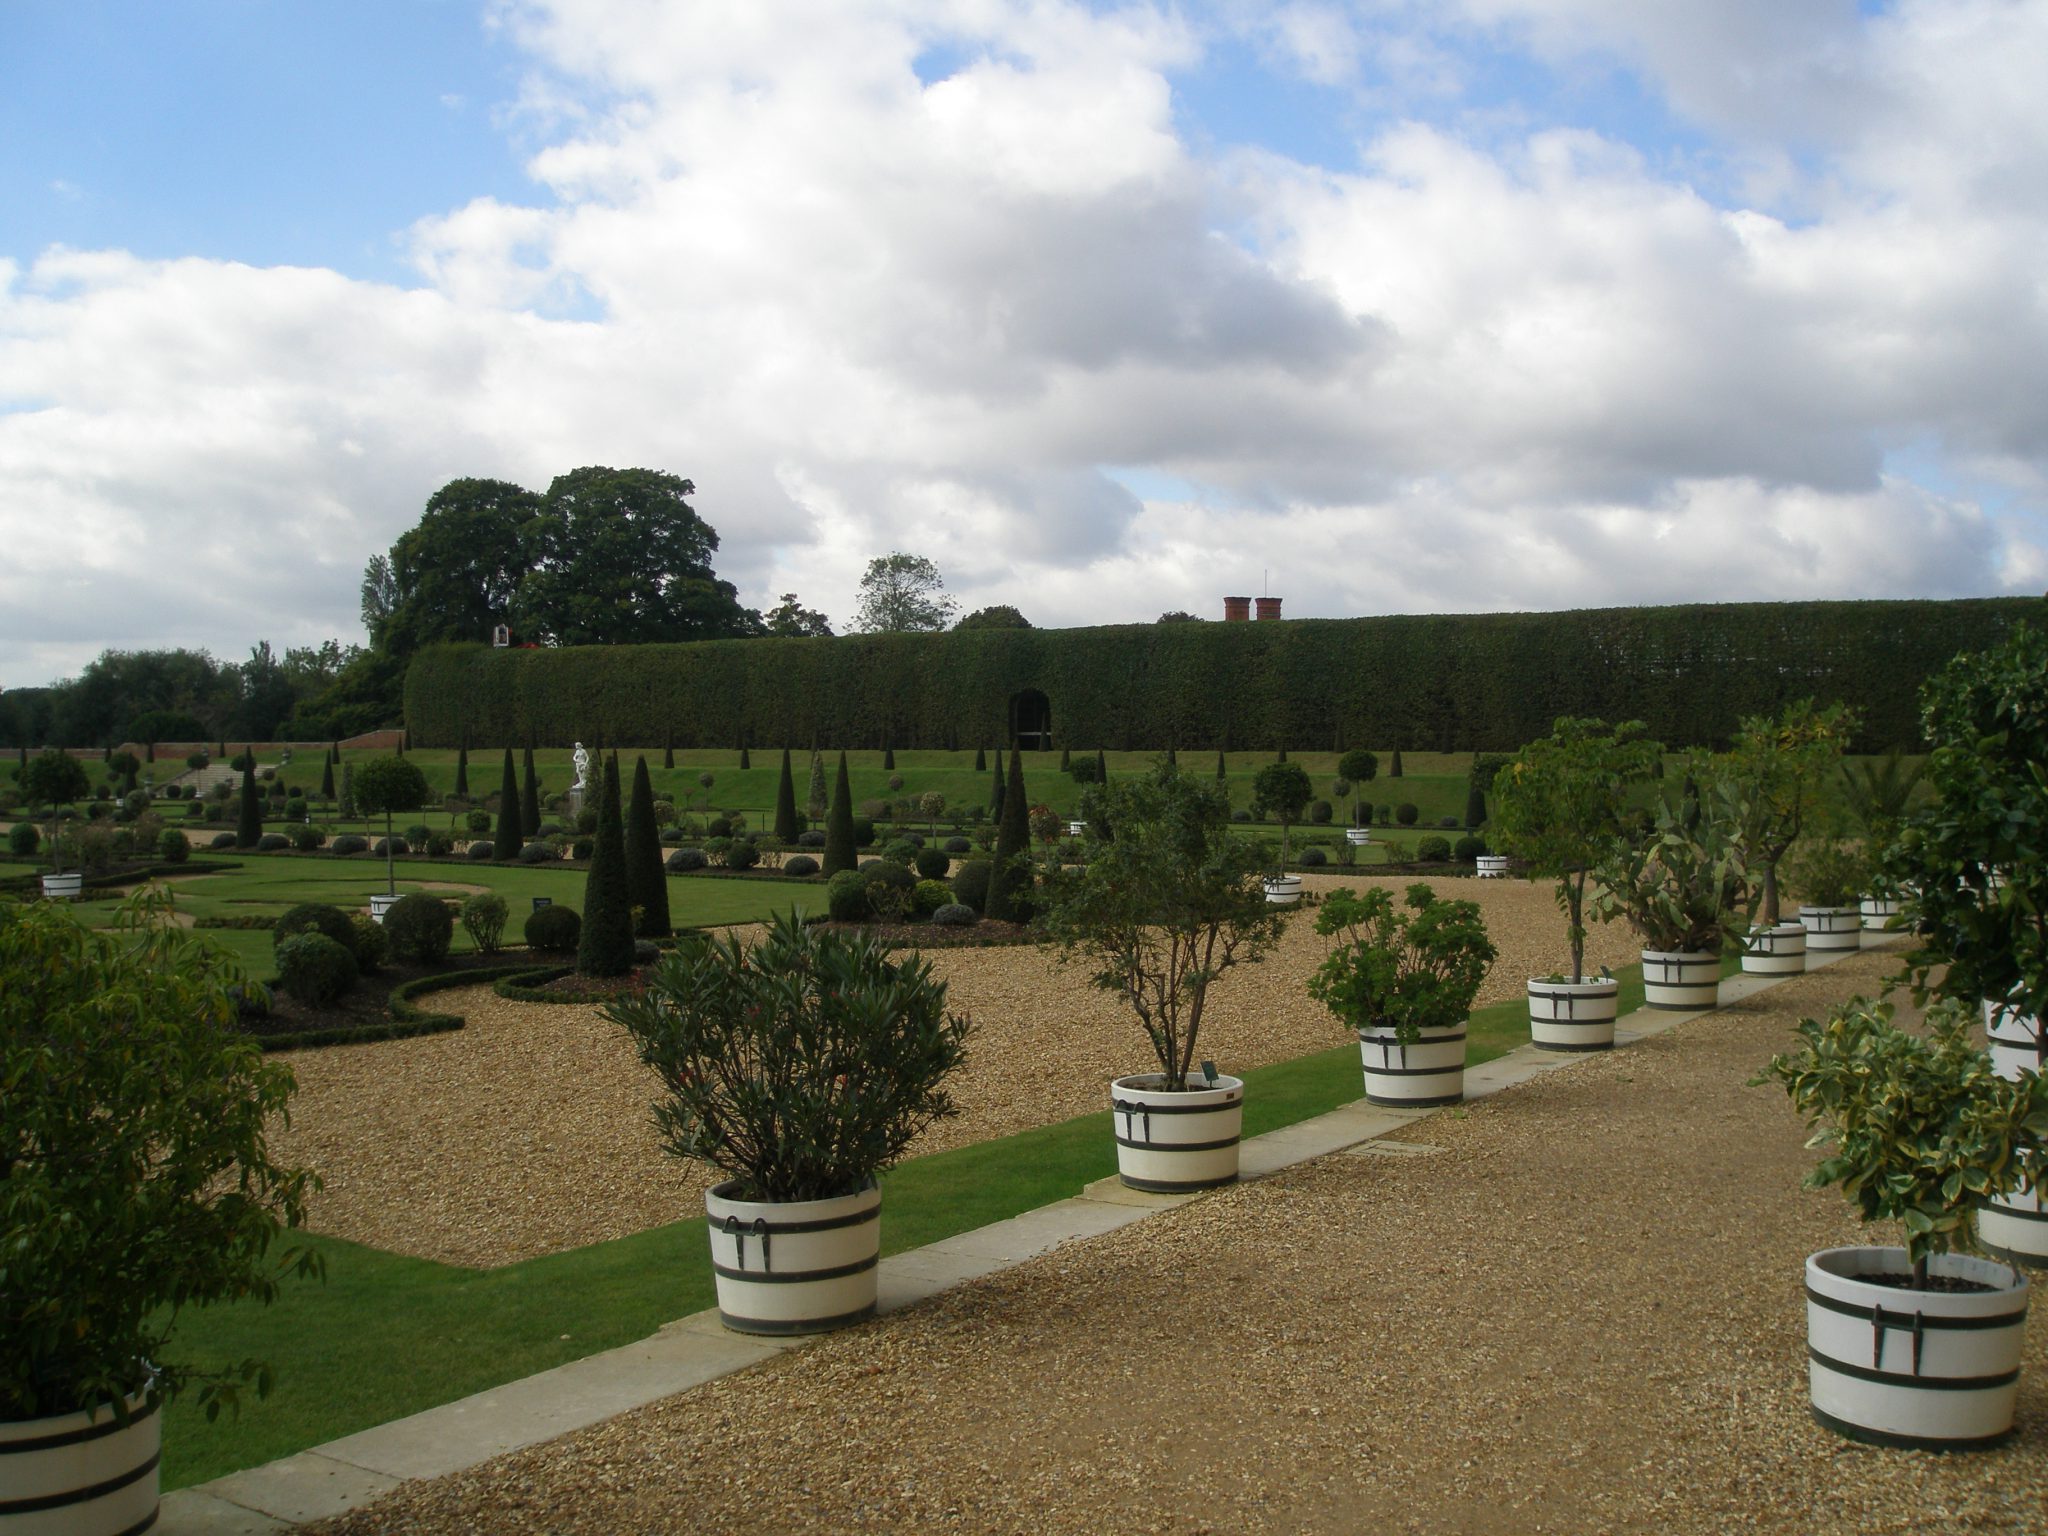 The Privy Garden, which was the monarch's own, private plot. The garden we see today is a restoration of William III's garden of 1702.